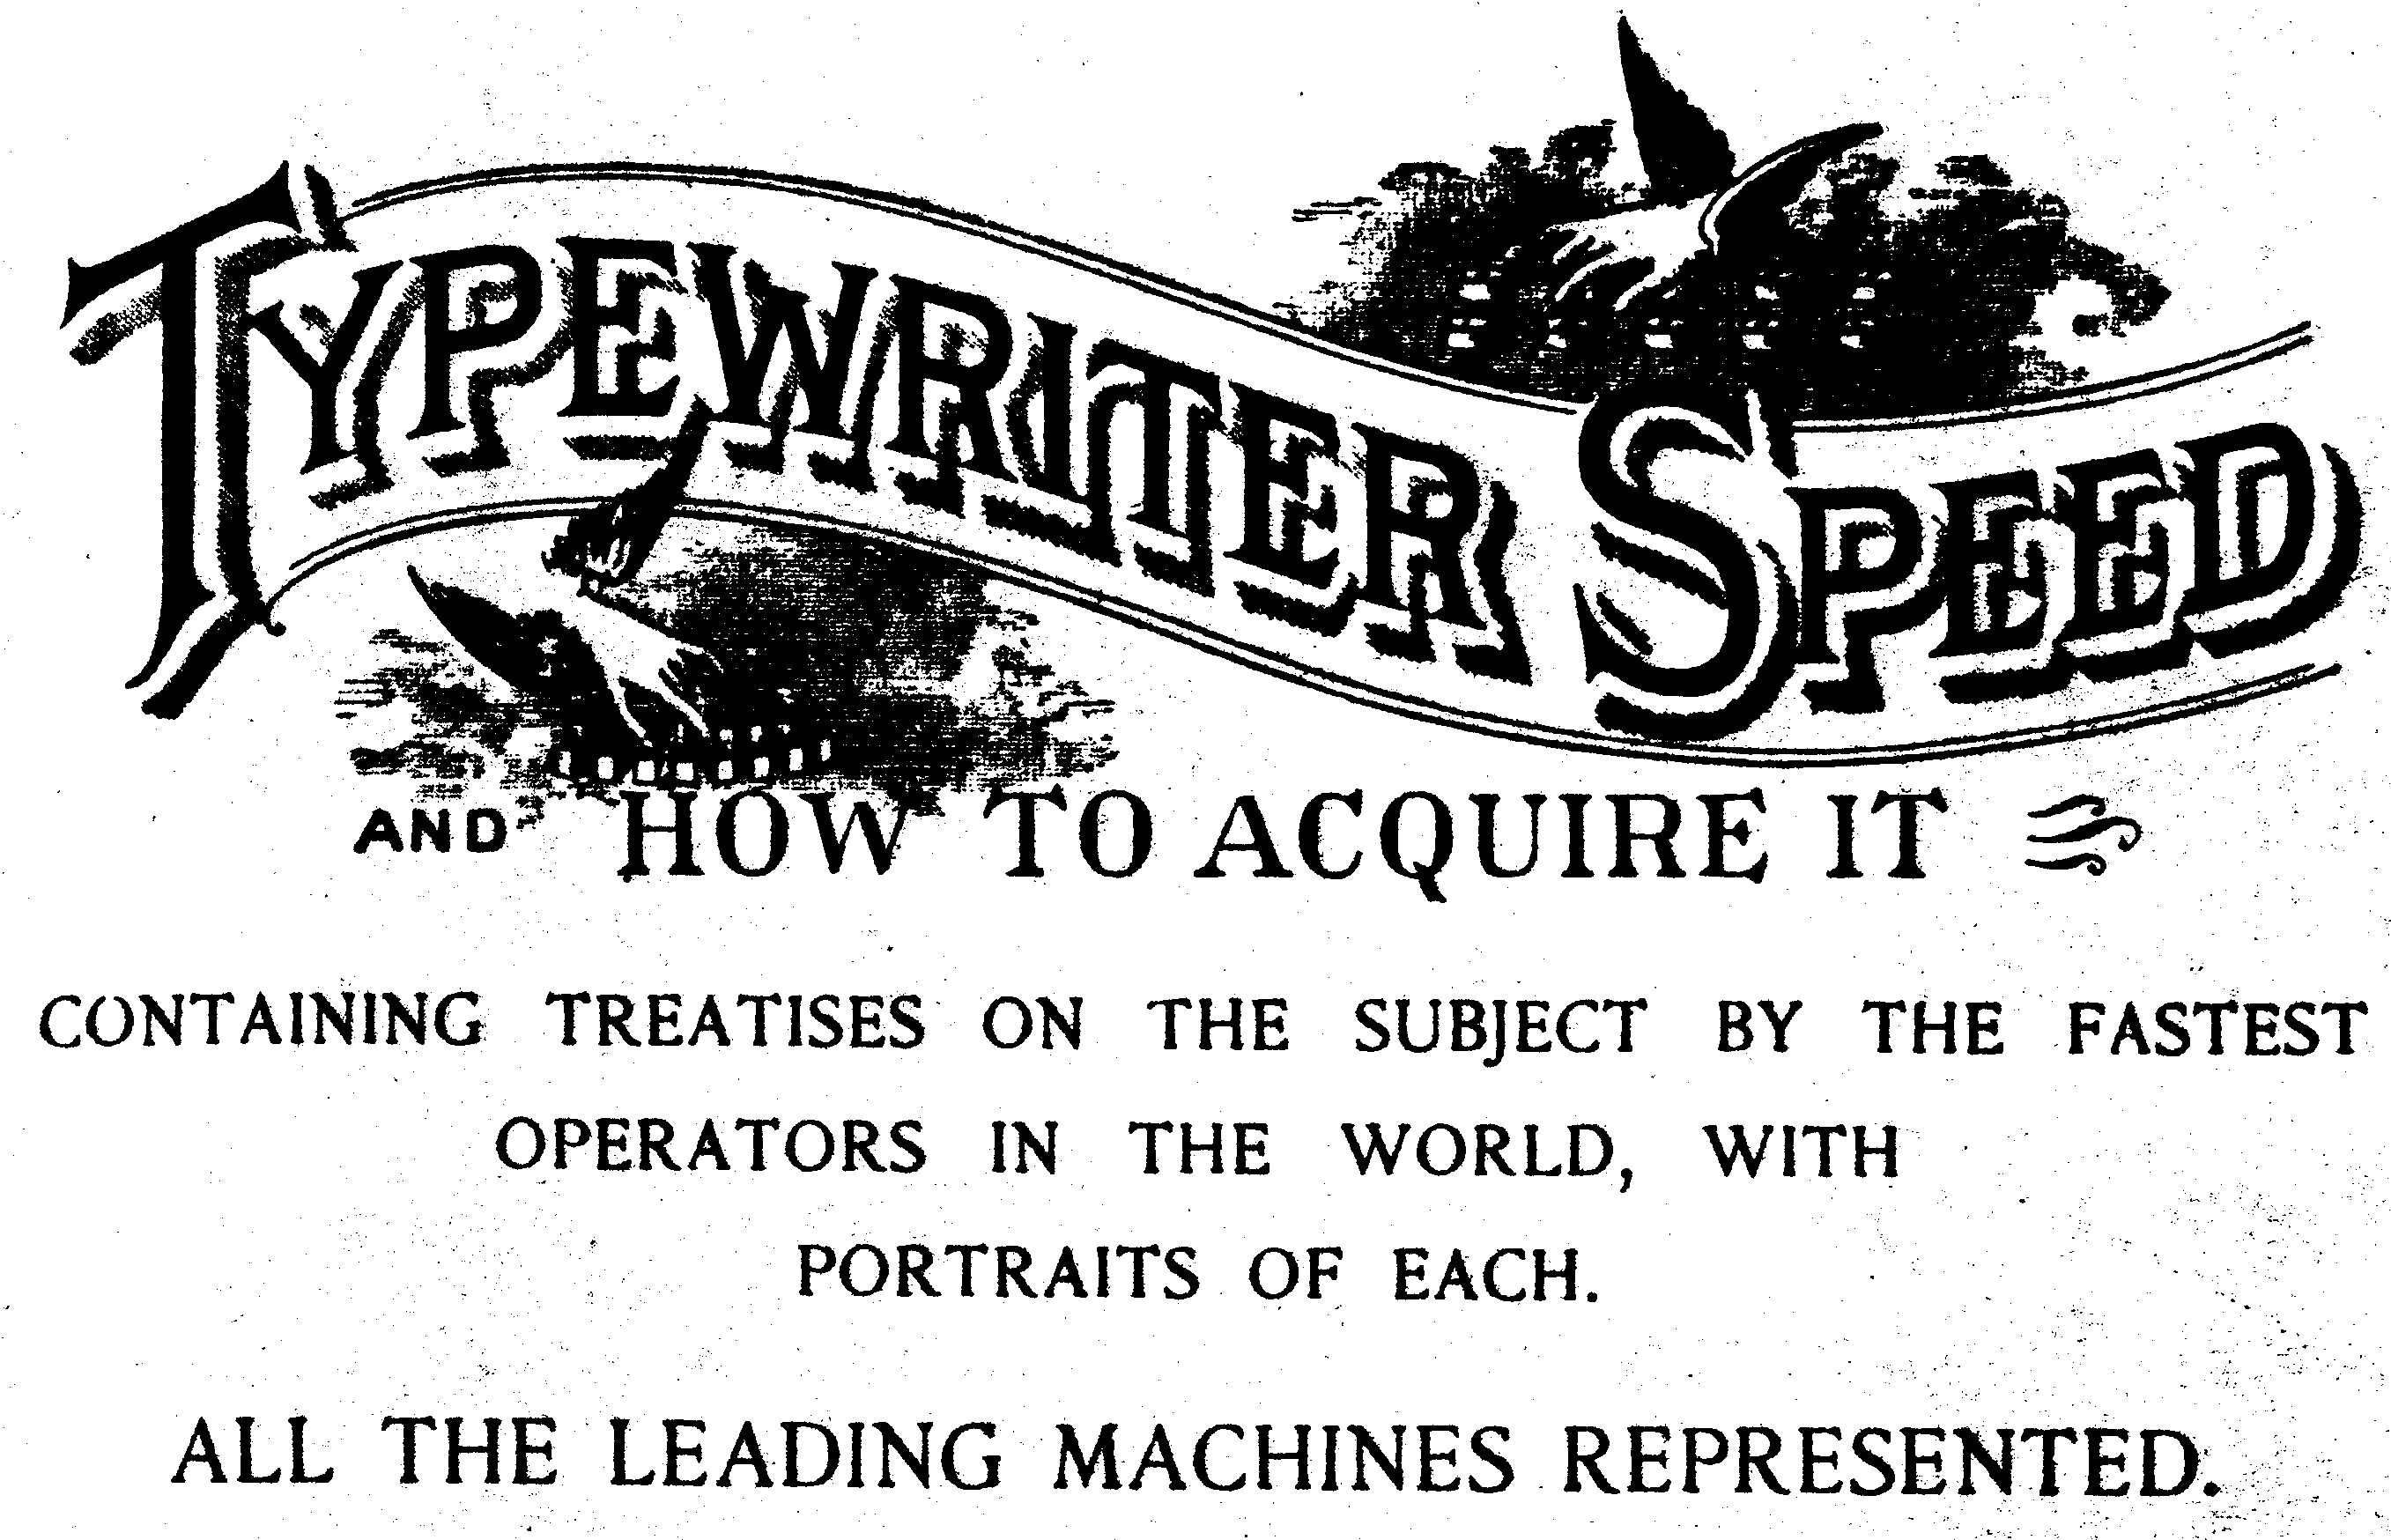 『Typewriter Speed and How to Acquire It』（1891年）タイトルヘッド